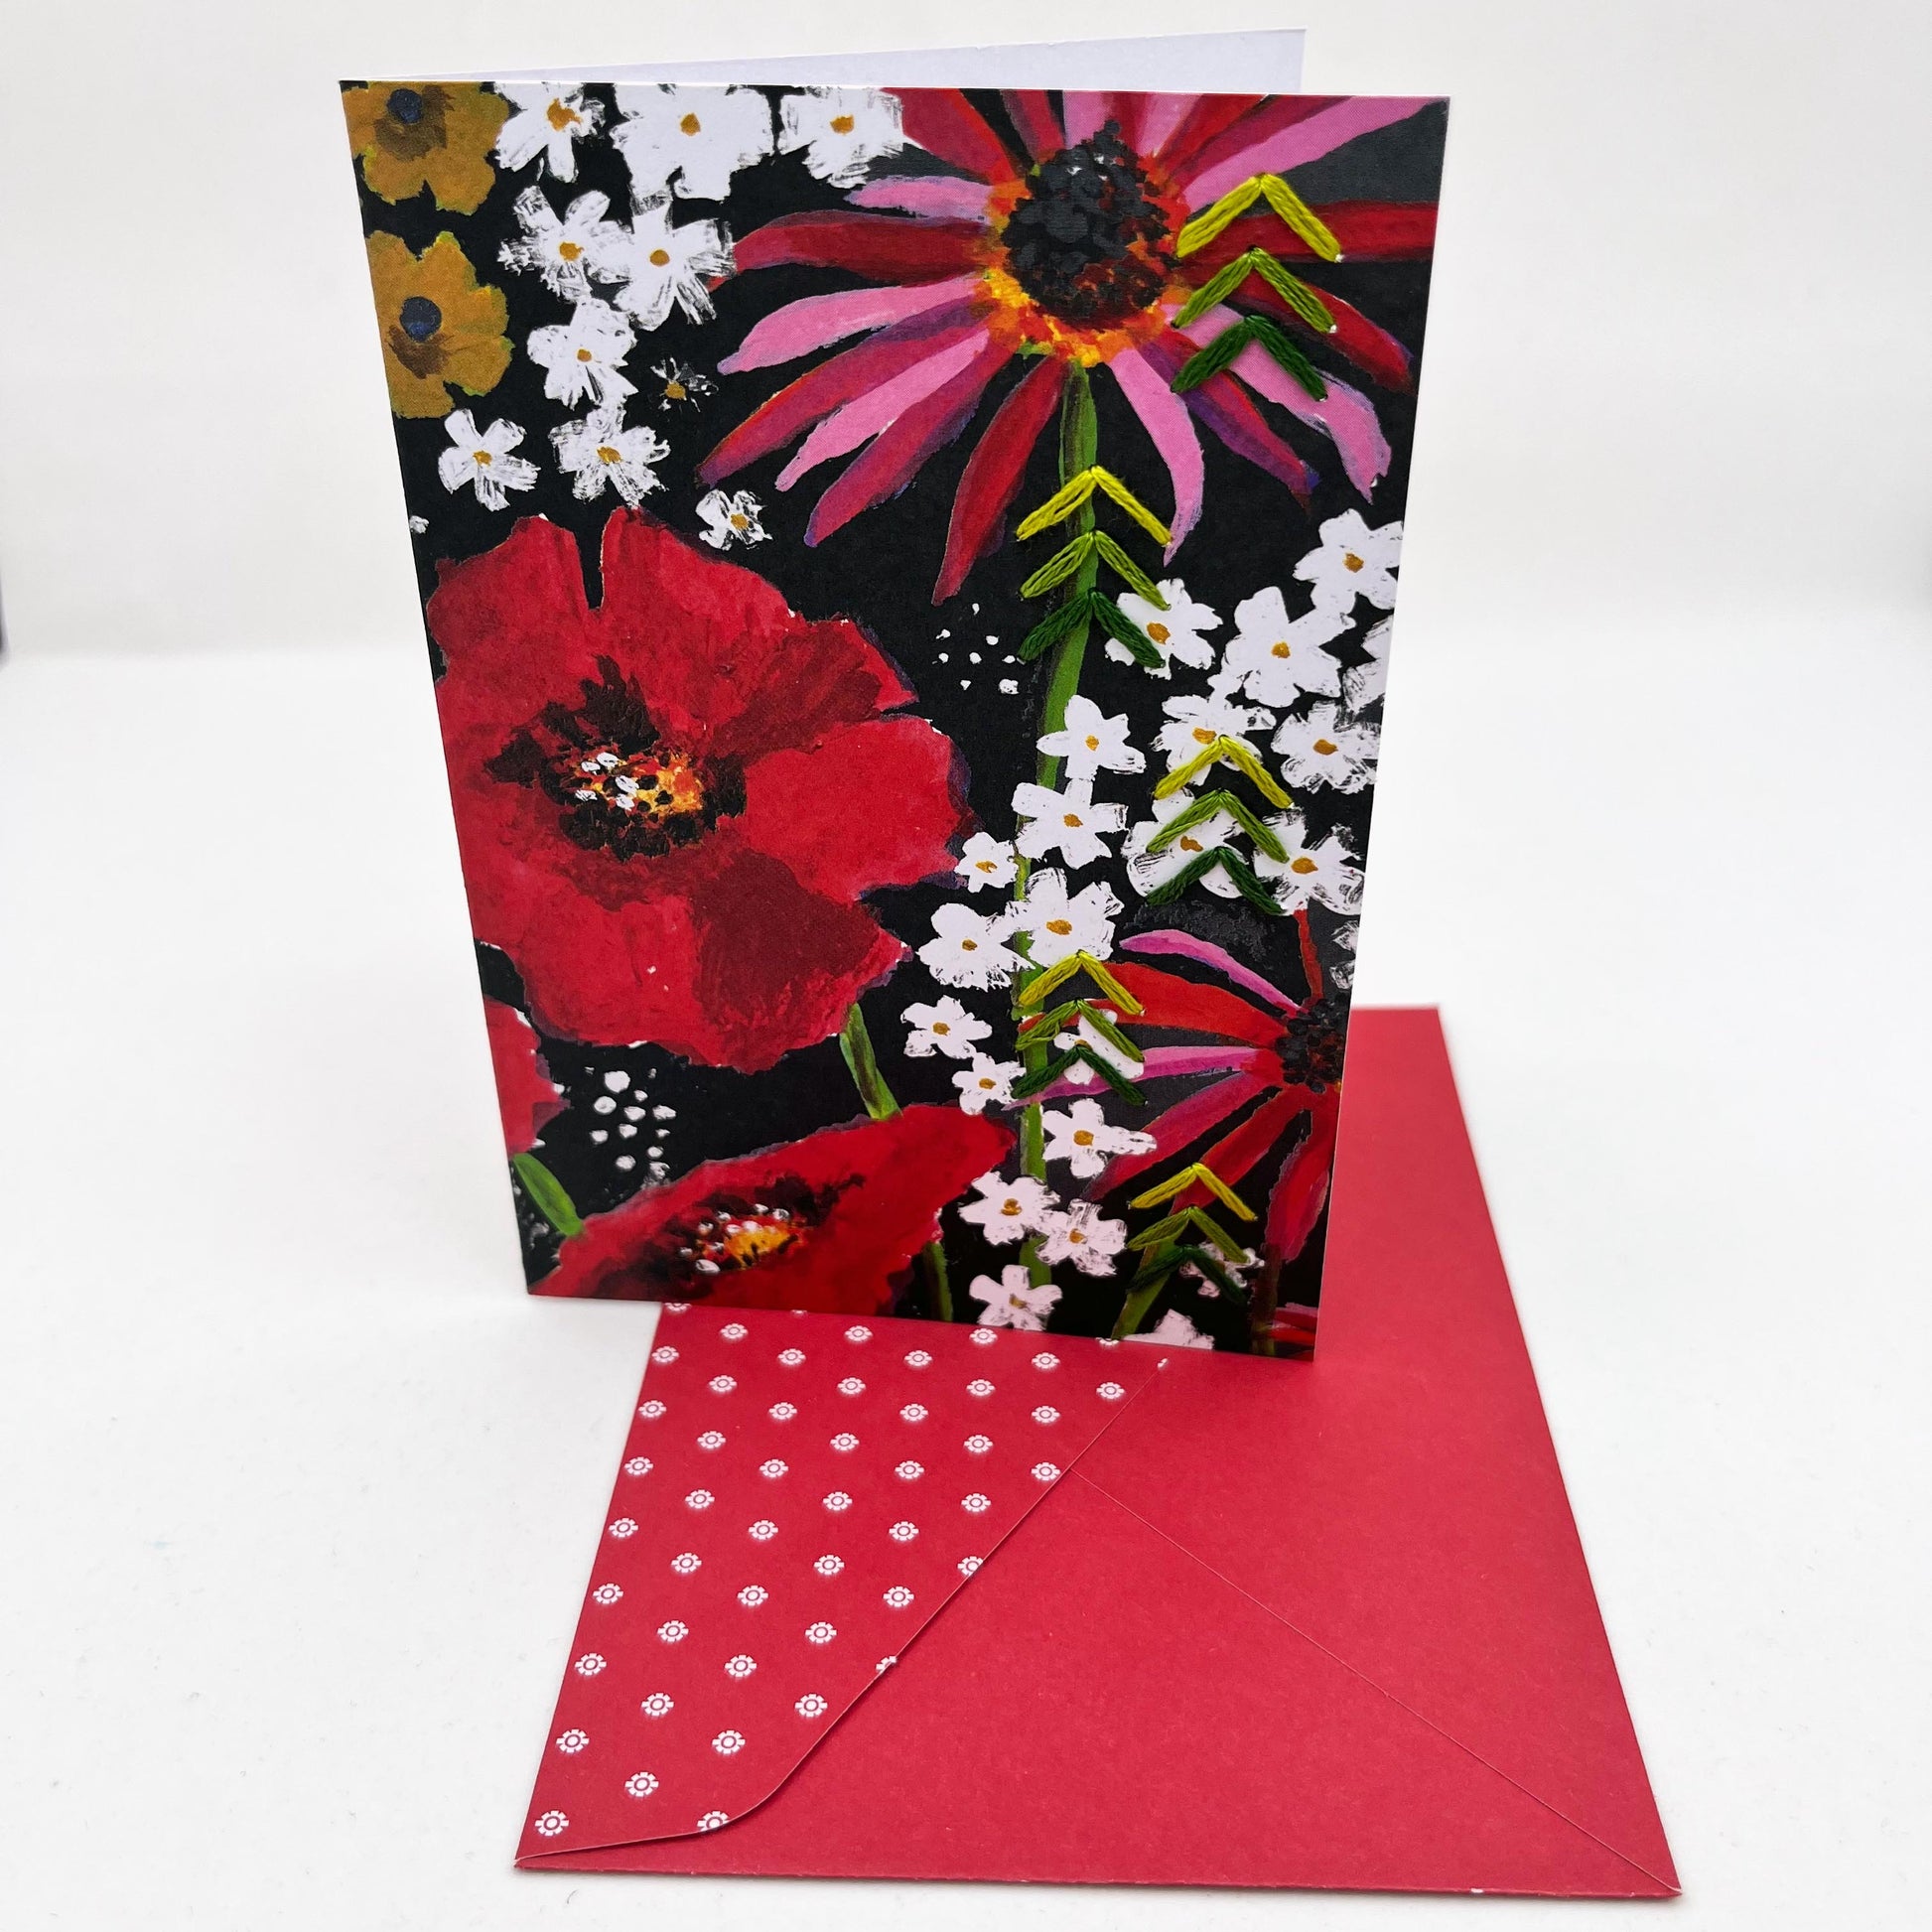 Greeting card standing upright on an envelope. artwork of painted flowers in red pink and white. Green stitches of groups of 3 chevrons to create abstract pine tree shape